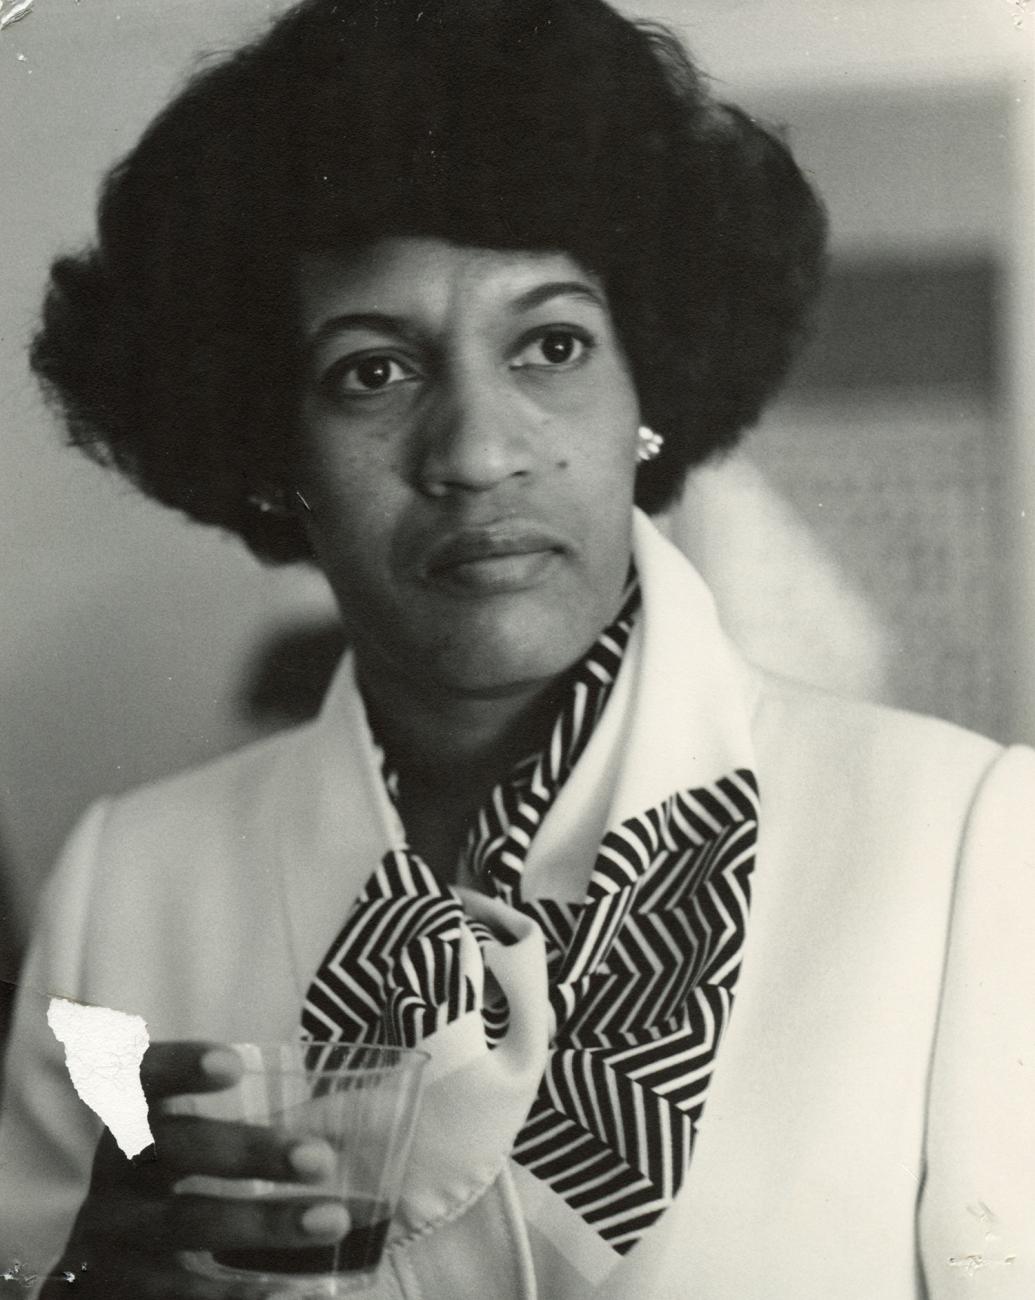 Myrlie Evers-Williams on the campaign trail, 24th Congressional District Campaign photograph, 1970.